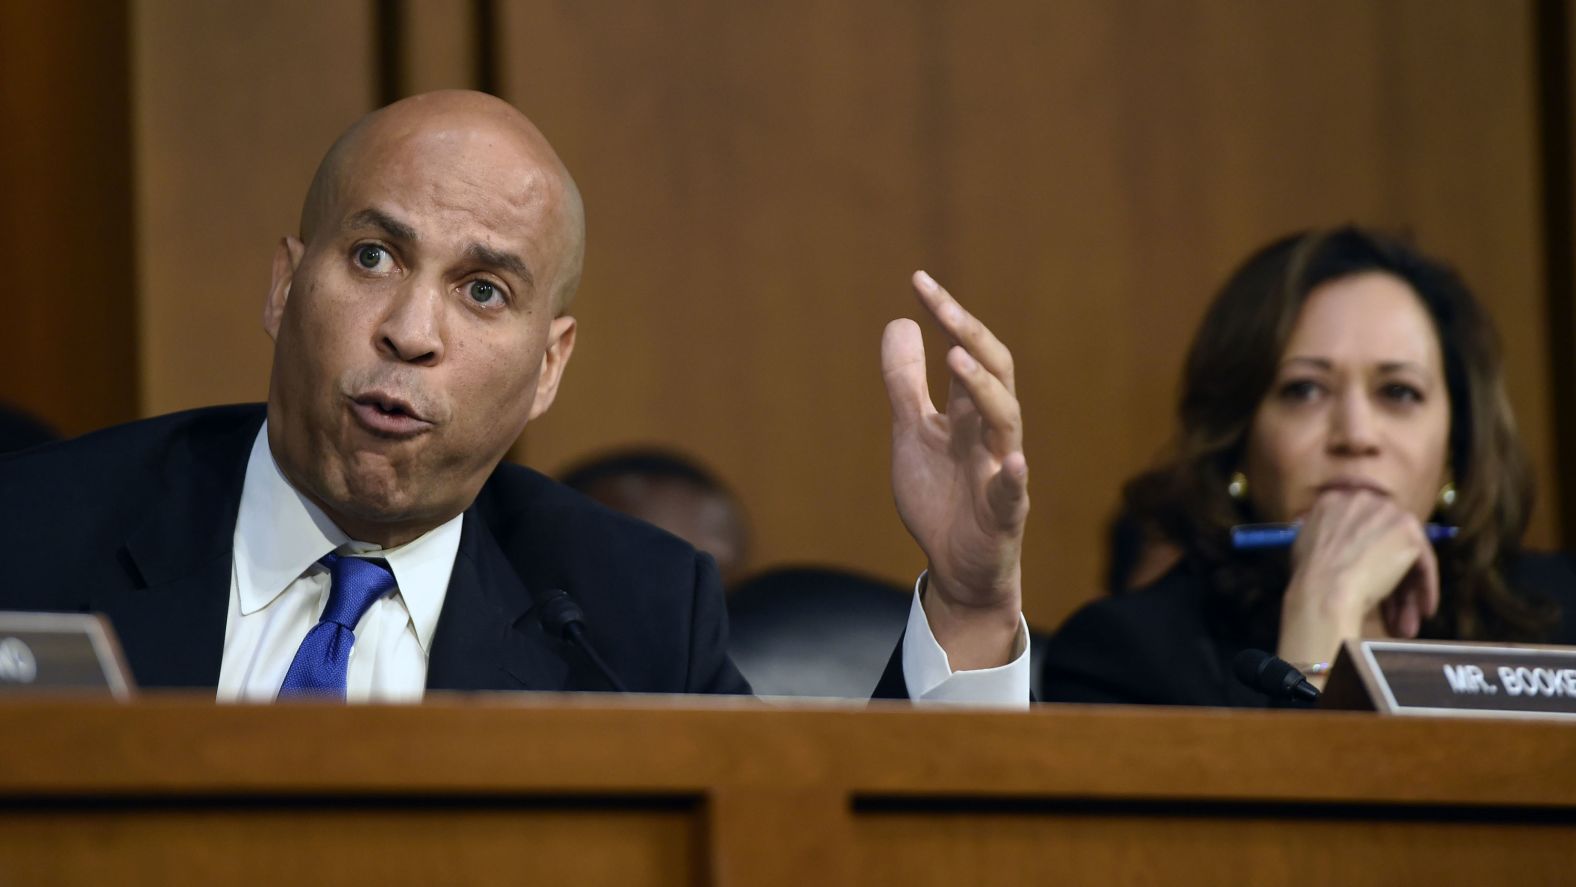 Senate Democrats -- including Cory Booker, left, and Kamala Harris -- <a href="index.php?page=&url=https%3A%2F%2Fwww.cnn.com%2F2018%2F09%2F04%2Fpolitics%2Fbrett-kavanaugh-supreme-court-senate-hearing%2Findex.html" target="_blank">disrupted the start of Tuesday's hearing,</a> saying they haven't had adequate time to review 42,000 documents that were released Monday night regarding Kavanaugh's service in the George W. Bush White House.